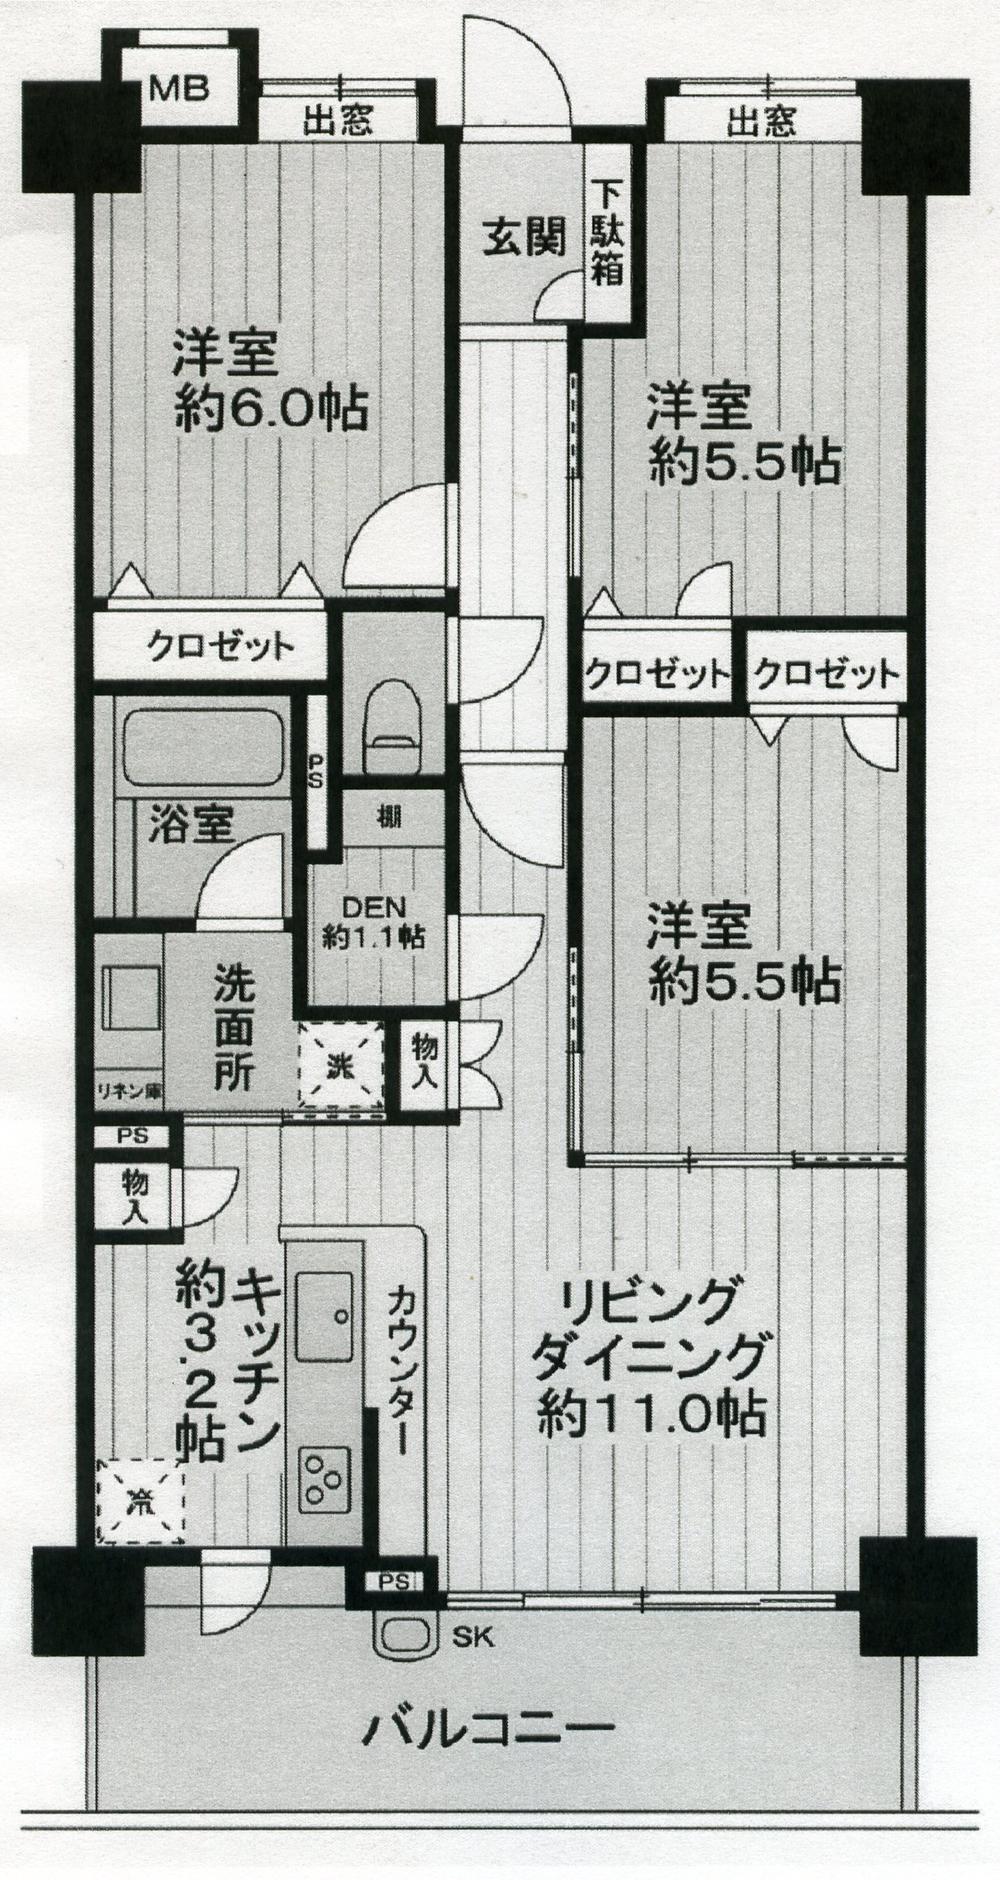 Floor plan. 3LDK + S (storeroom), Price 29,800,000 yen, Occupied area 68.77 sq m , There is a balcony area 11.22 sq m about 1.1 Pledge of study, Also available as a storage room.